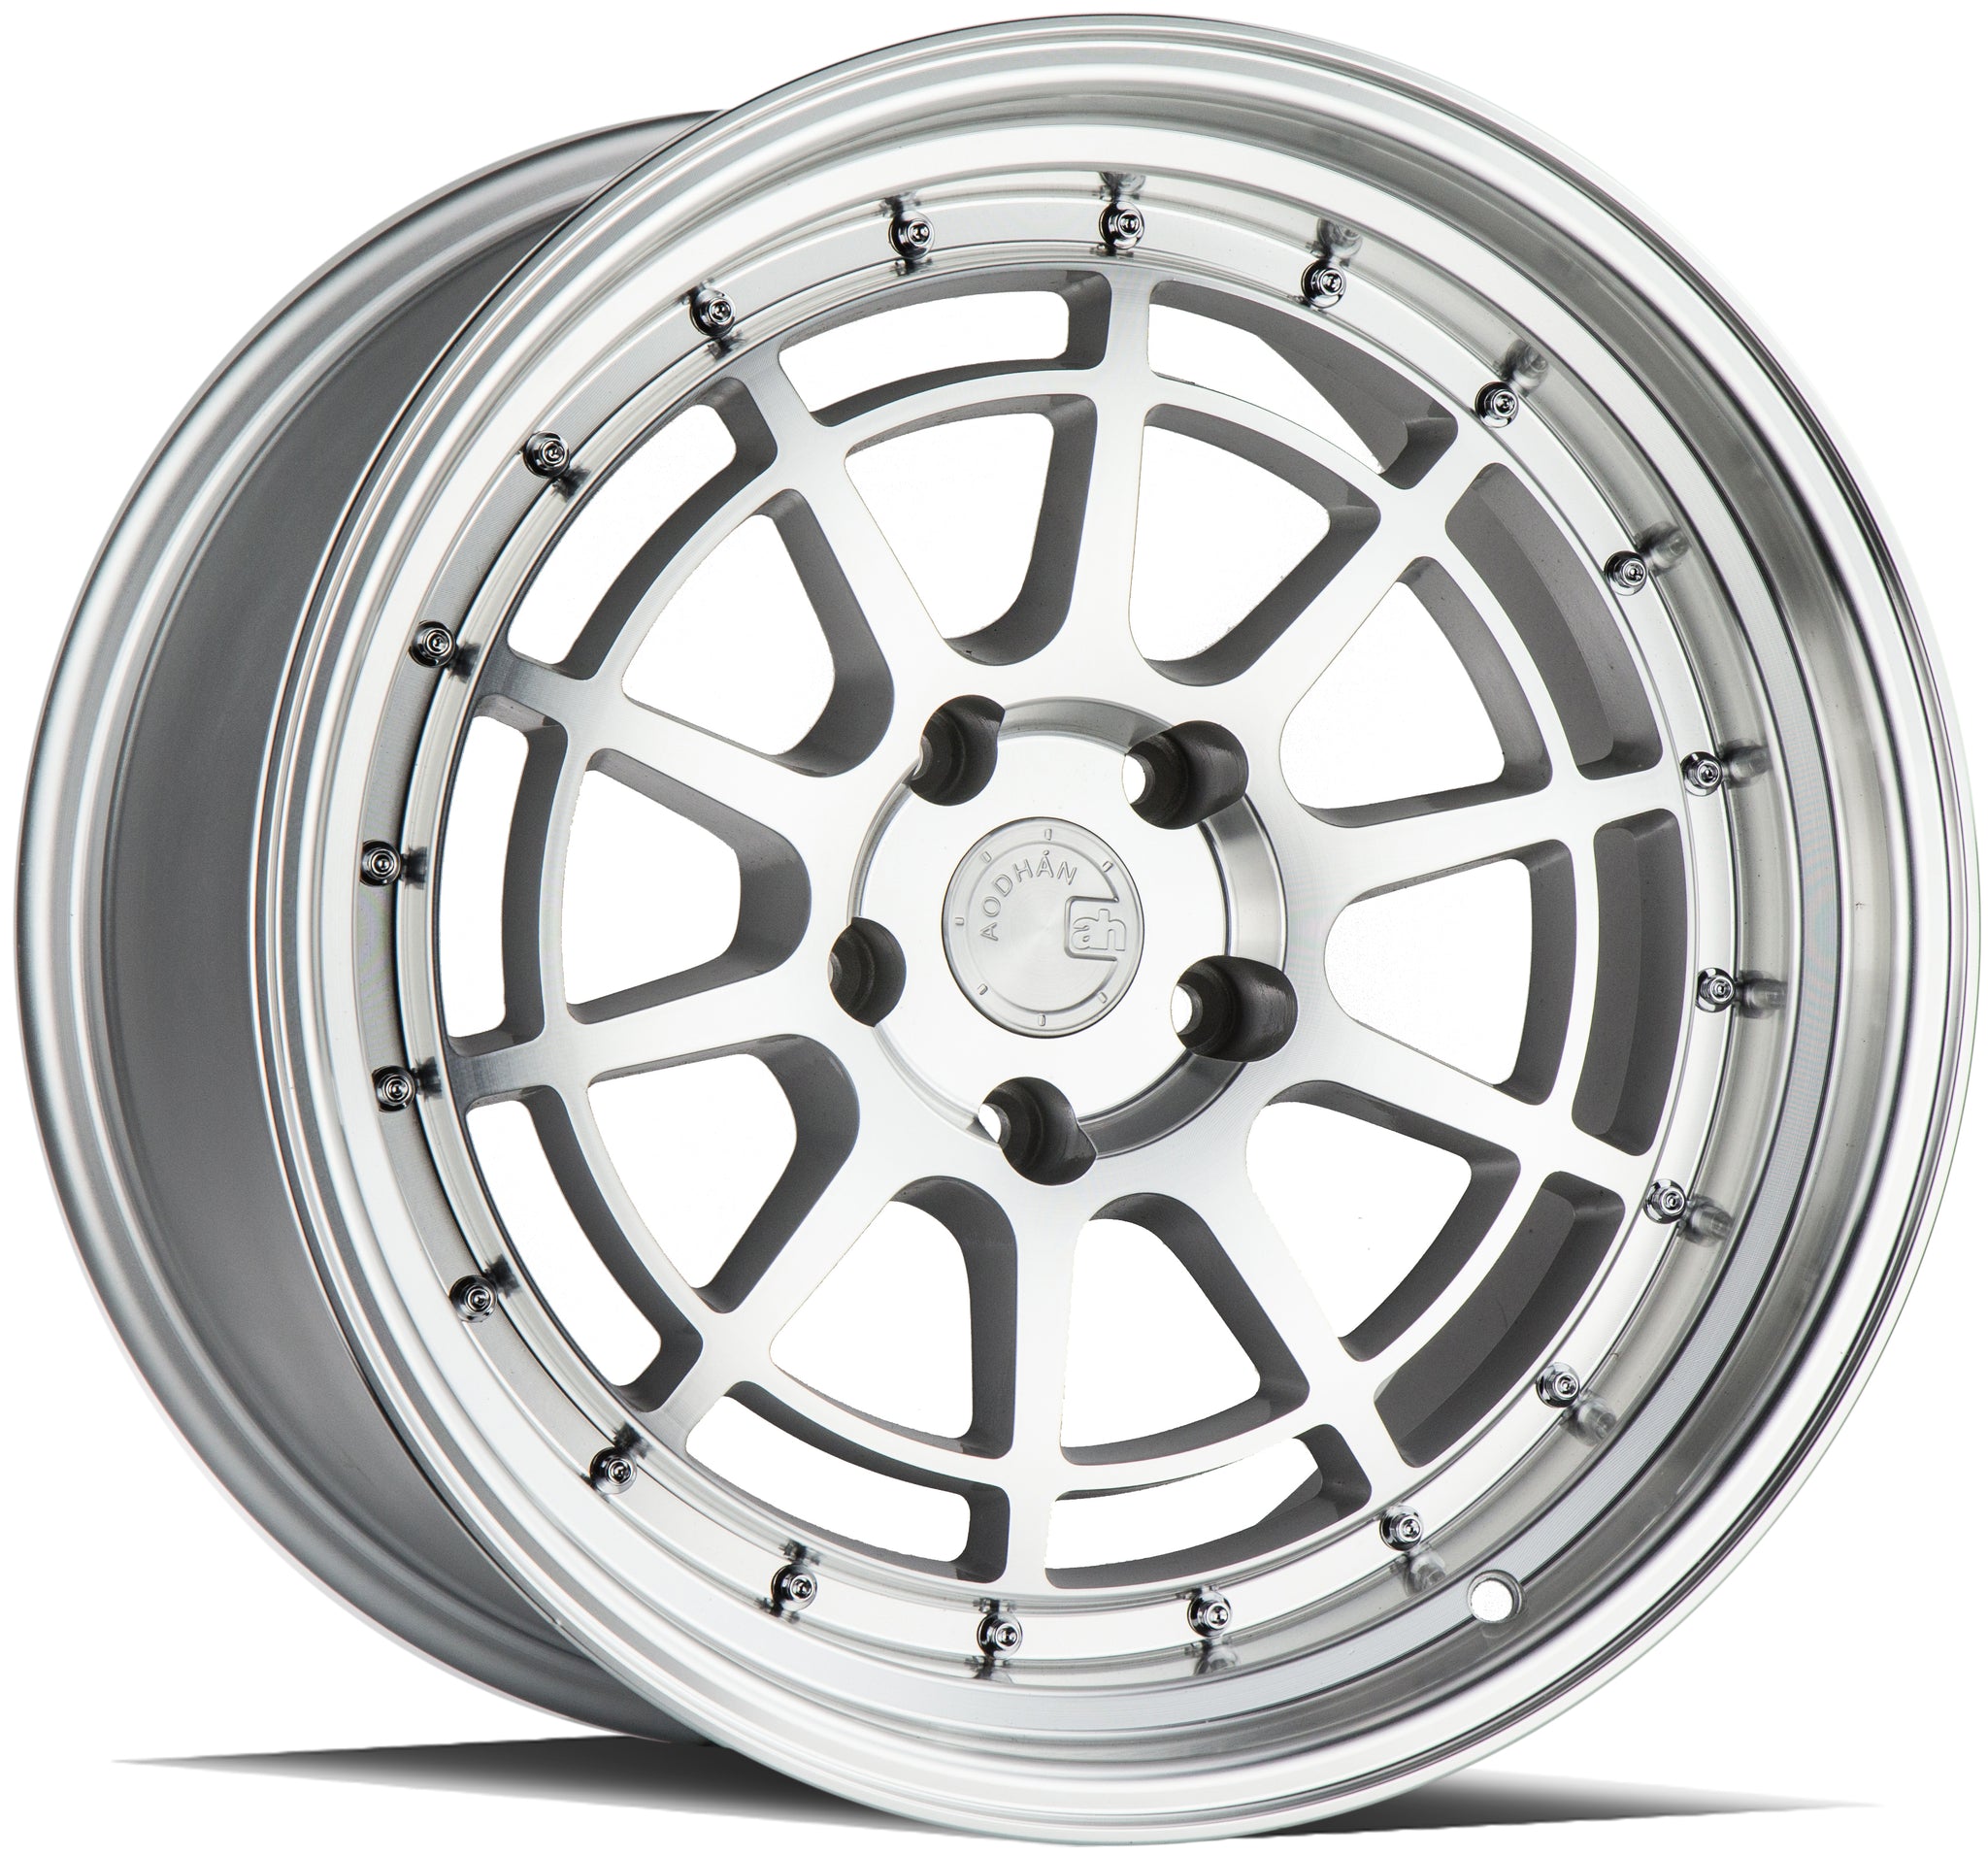 AODHAN AH04 SILVER WITH MACHINED FACE WHEELS | 18X10.5 | 5X114.3 | OFFSET: 25MM | CB: 73.1MM